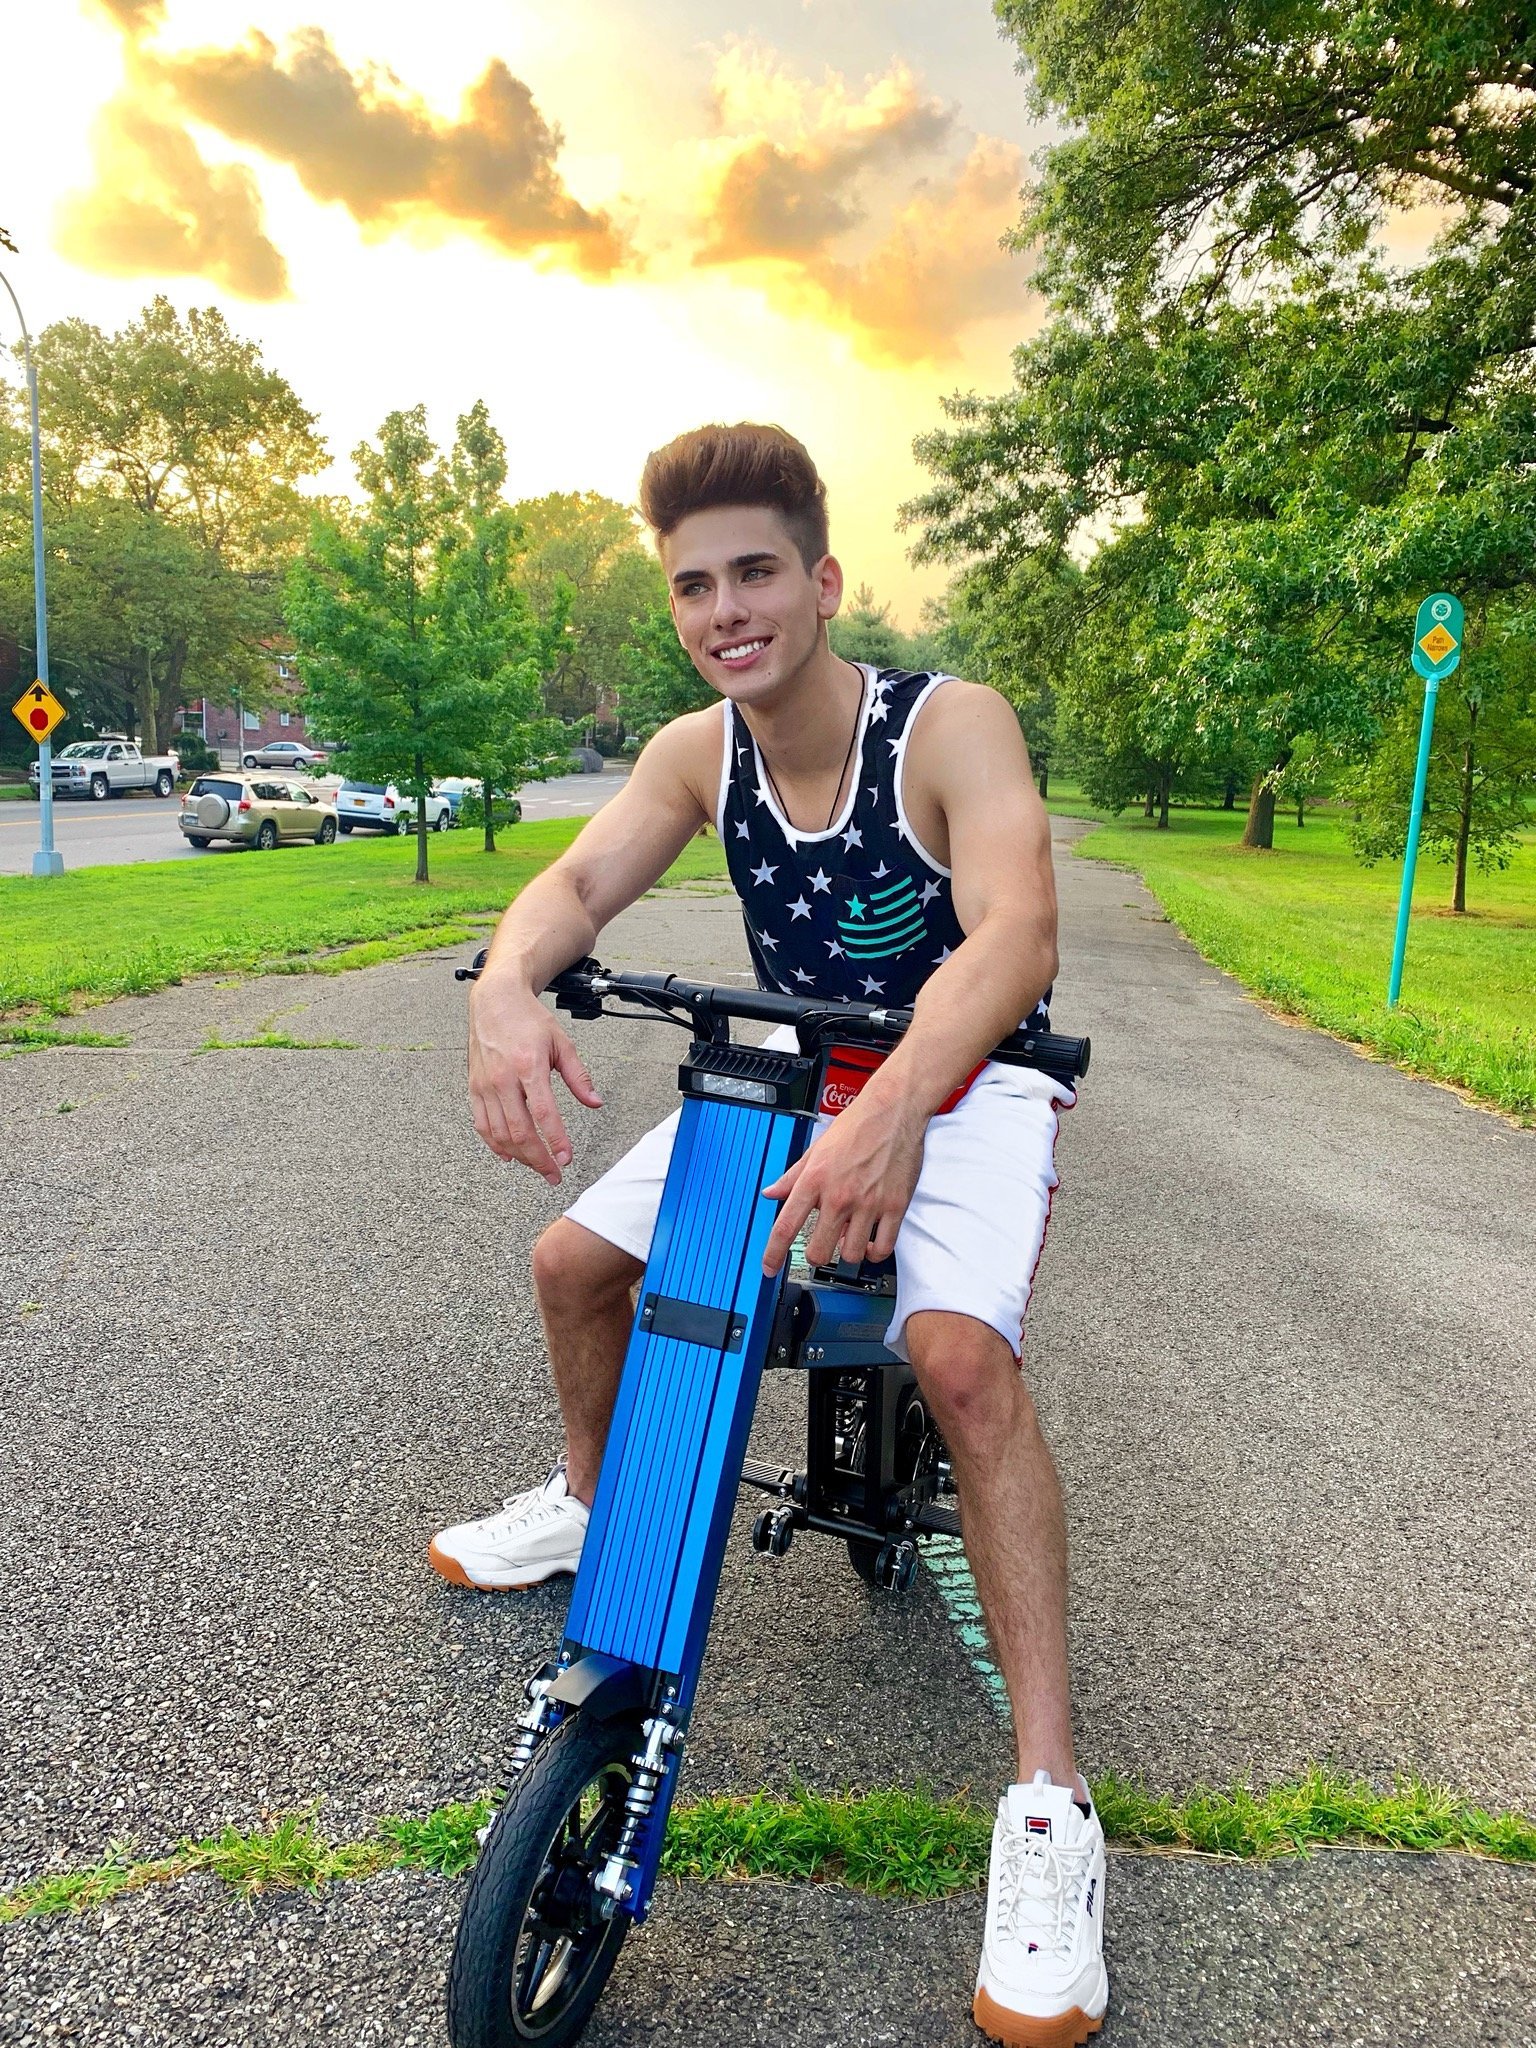 @Johnnyvalentinee poses on his Blue Go-Bike M2 after exploring the New York parks